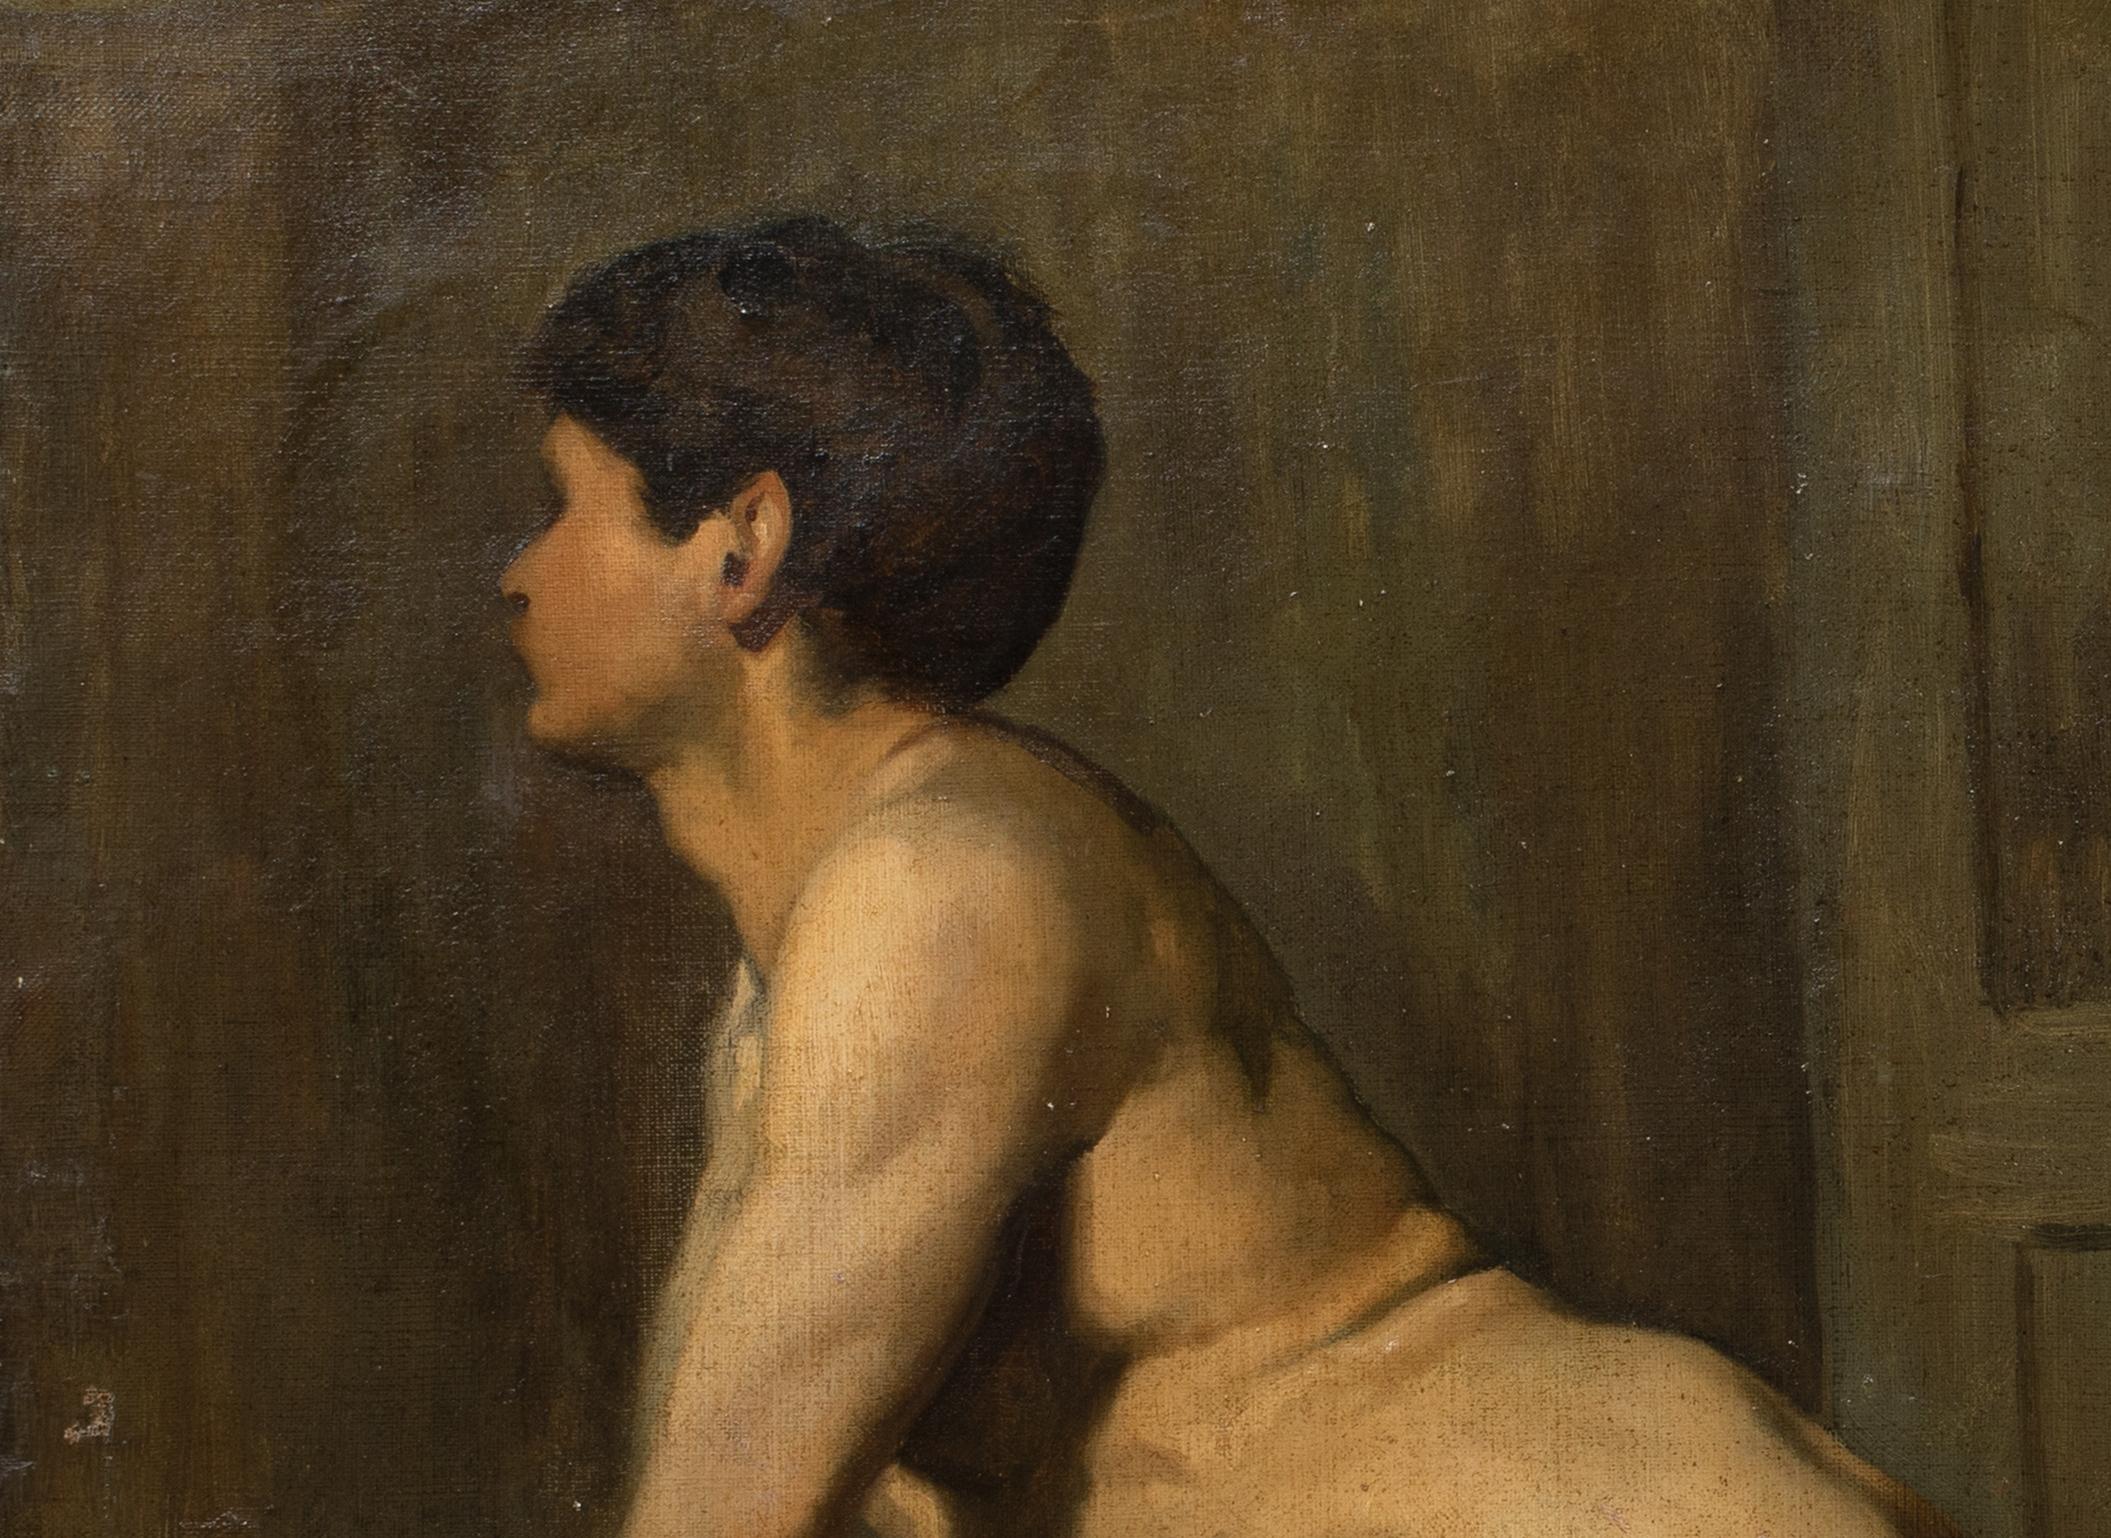 Nude Portrait Of A Boy, early 20th - Brown Portrait Painting by Unknown